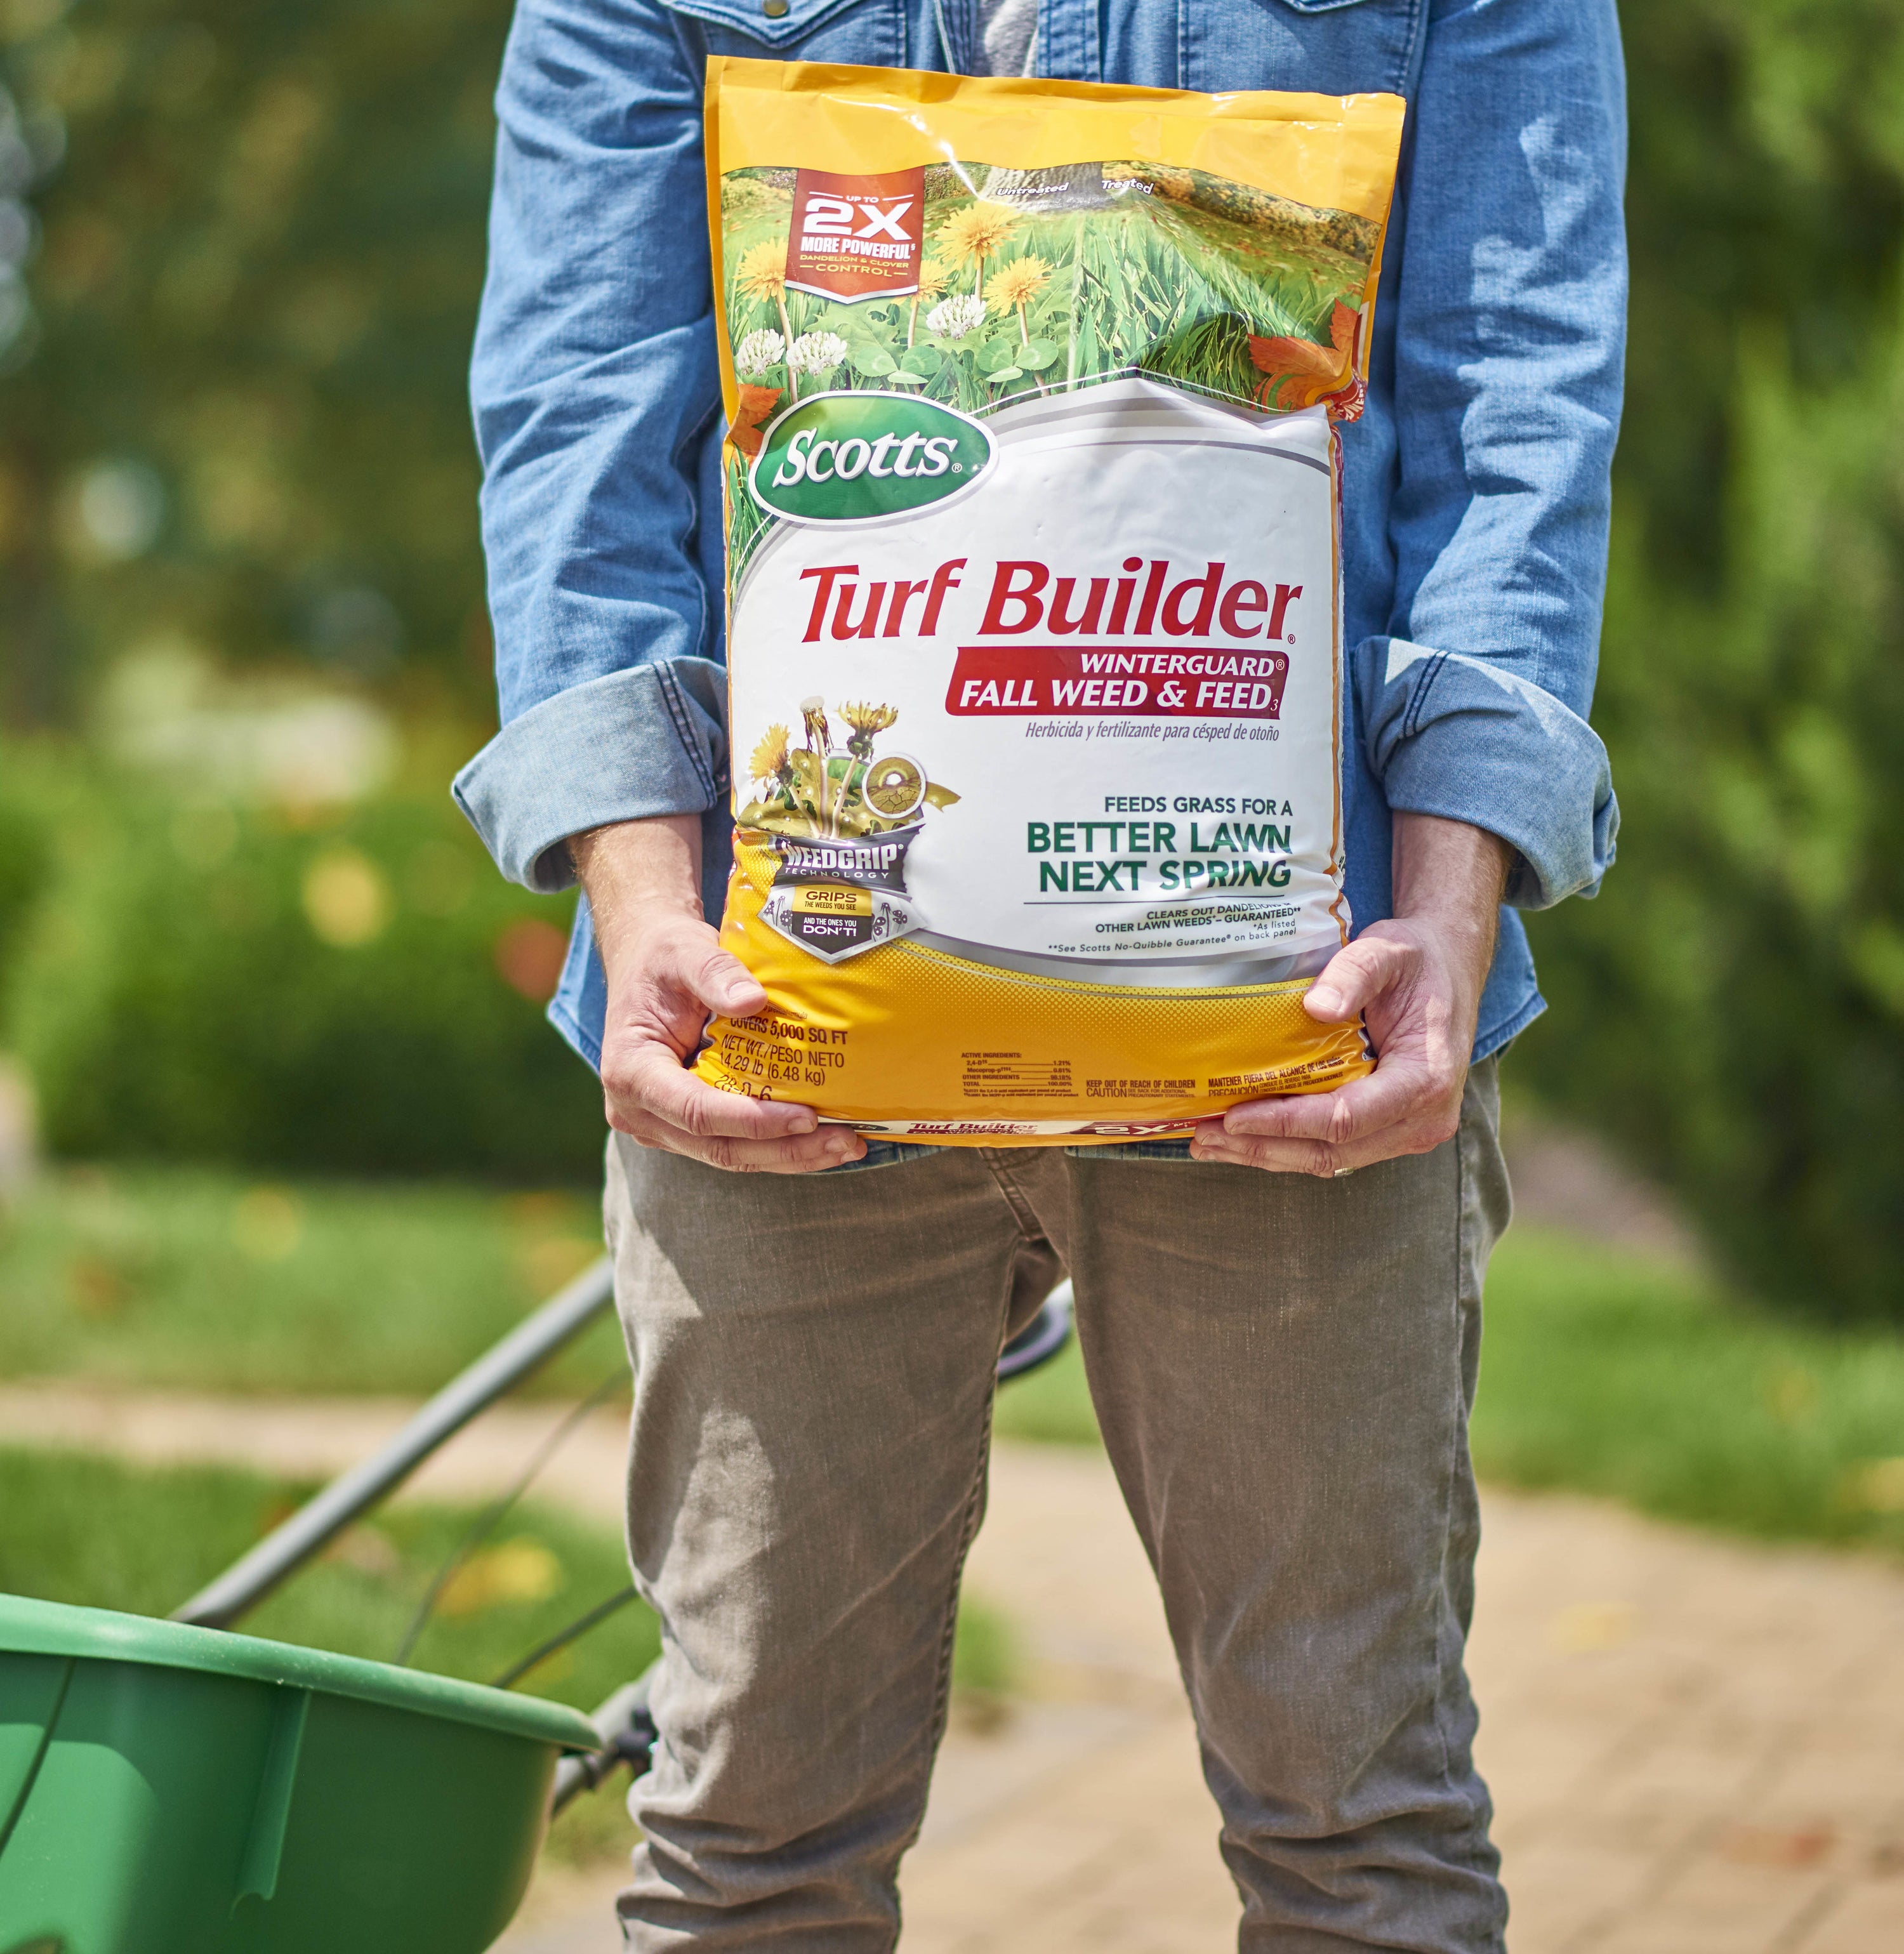 Model holding a large yellow bag of Scotts turf builder